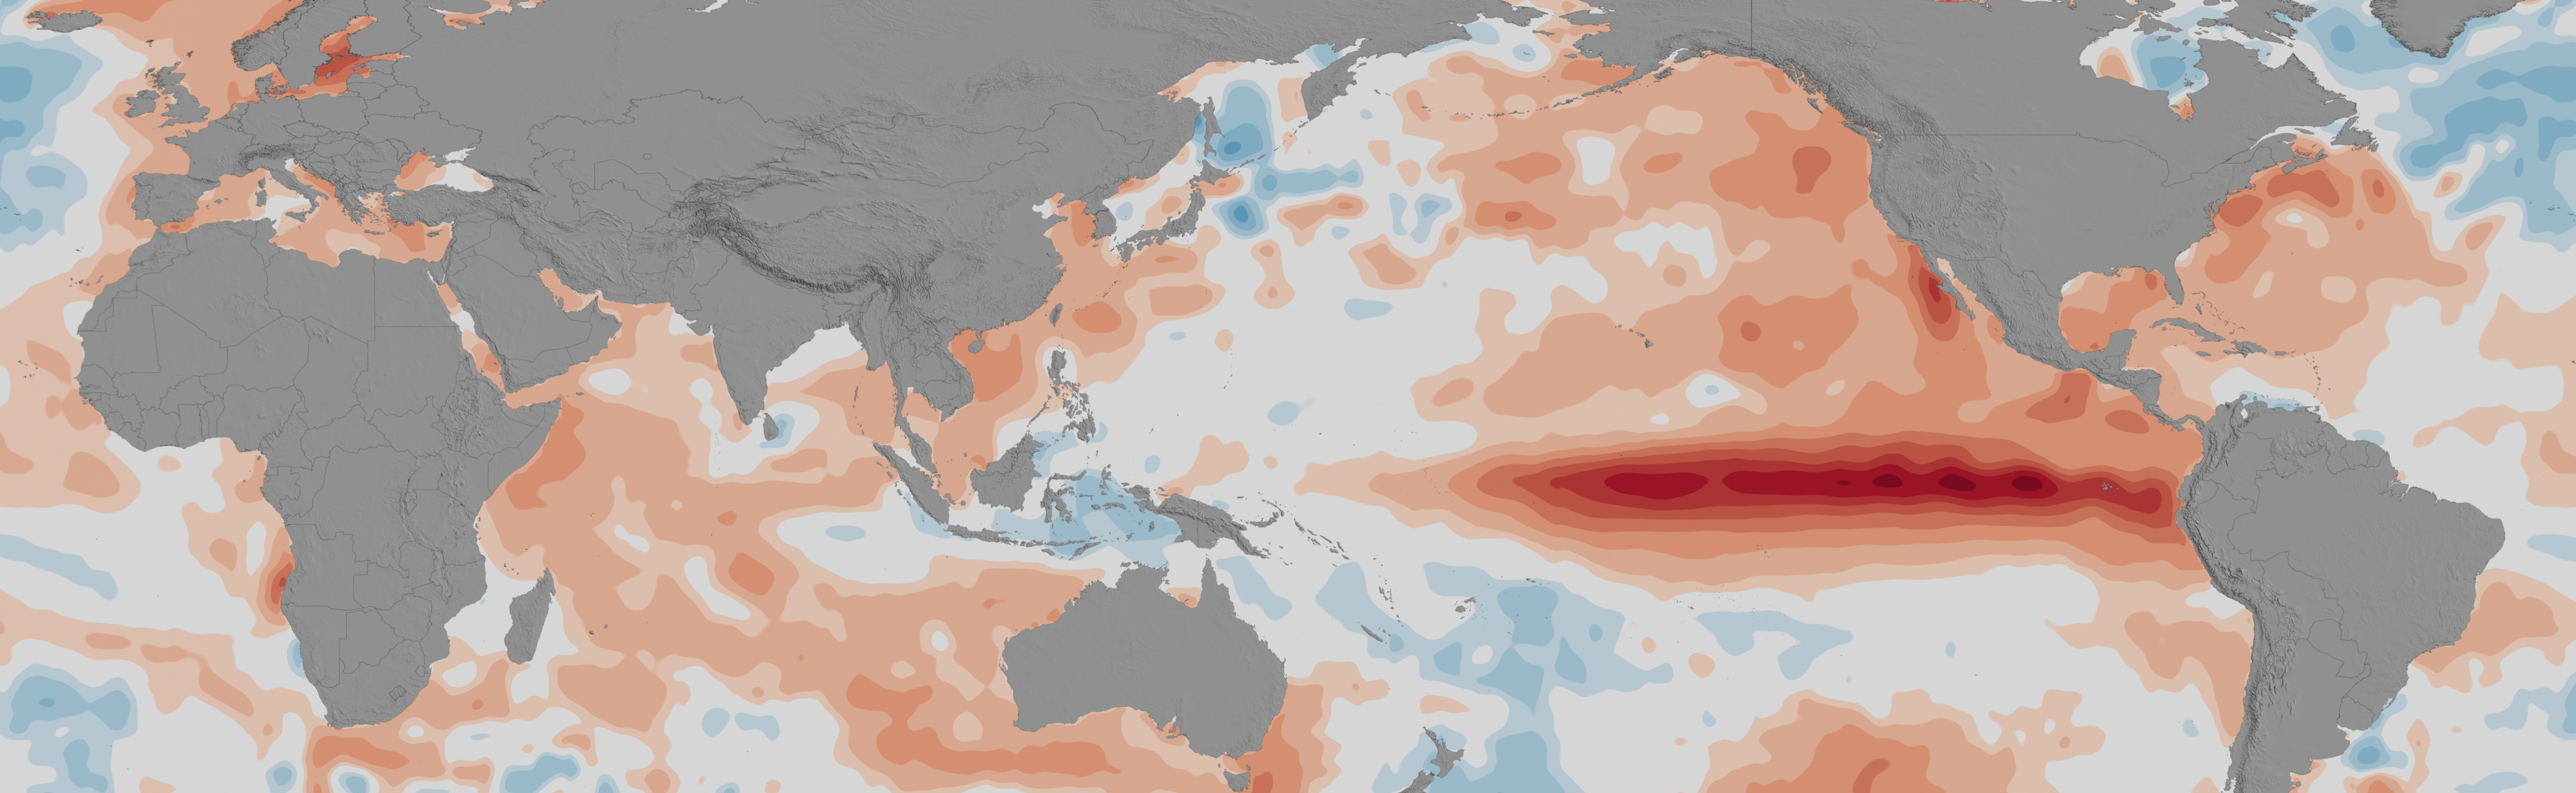 A flat map of the world showing relative sea surface temperatures compared to a baseline. Areas of warmer temperatures appear pink or red; areas of cooler temperatures appear light blue. The continents are depicted in medium gray. The water around the coasts of Africa, Asia, Australia, and North America is deep pink to red, with a huge red line representing El Niño-heated water extending horizontally away from the coast of upper South America. Smaller cool blue areas appear scattered across the northern and southern parts of the oceans, with a larger cool patch to the right of North America, south of Greenland.